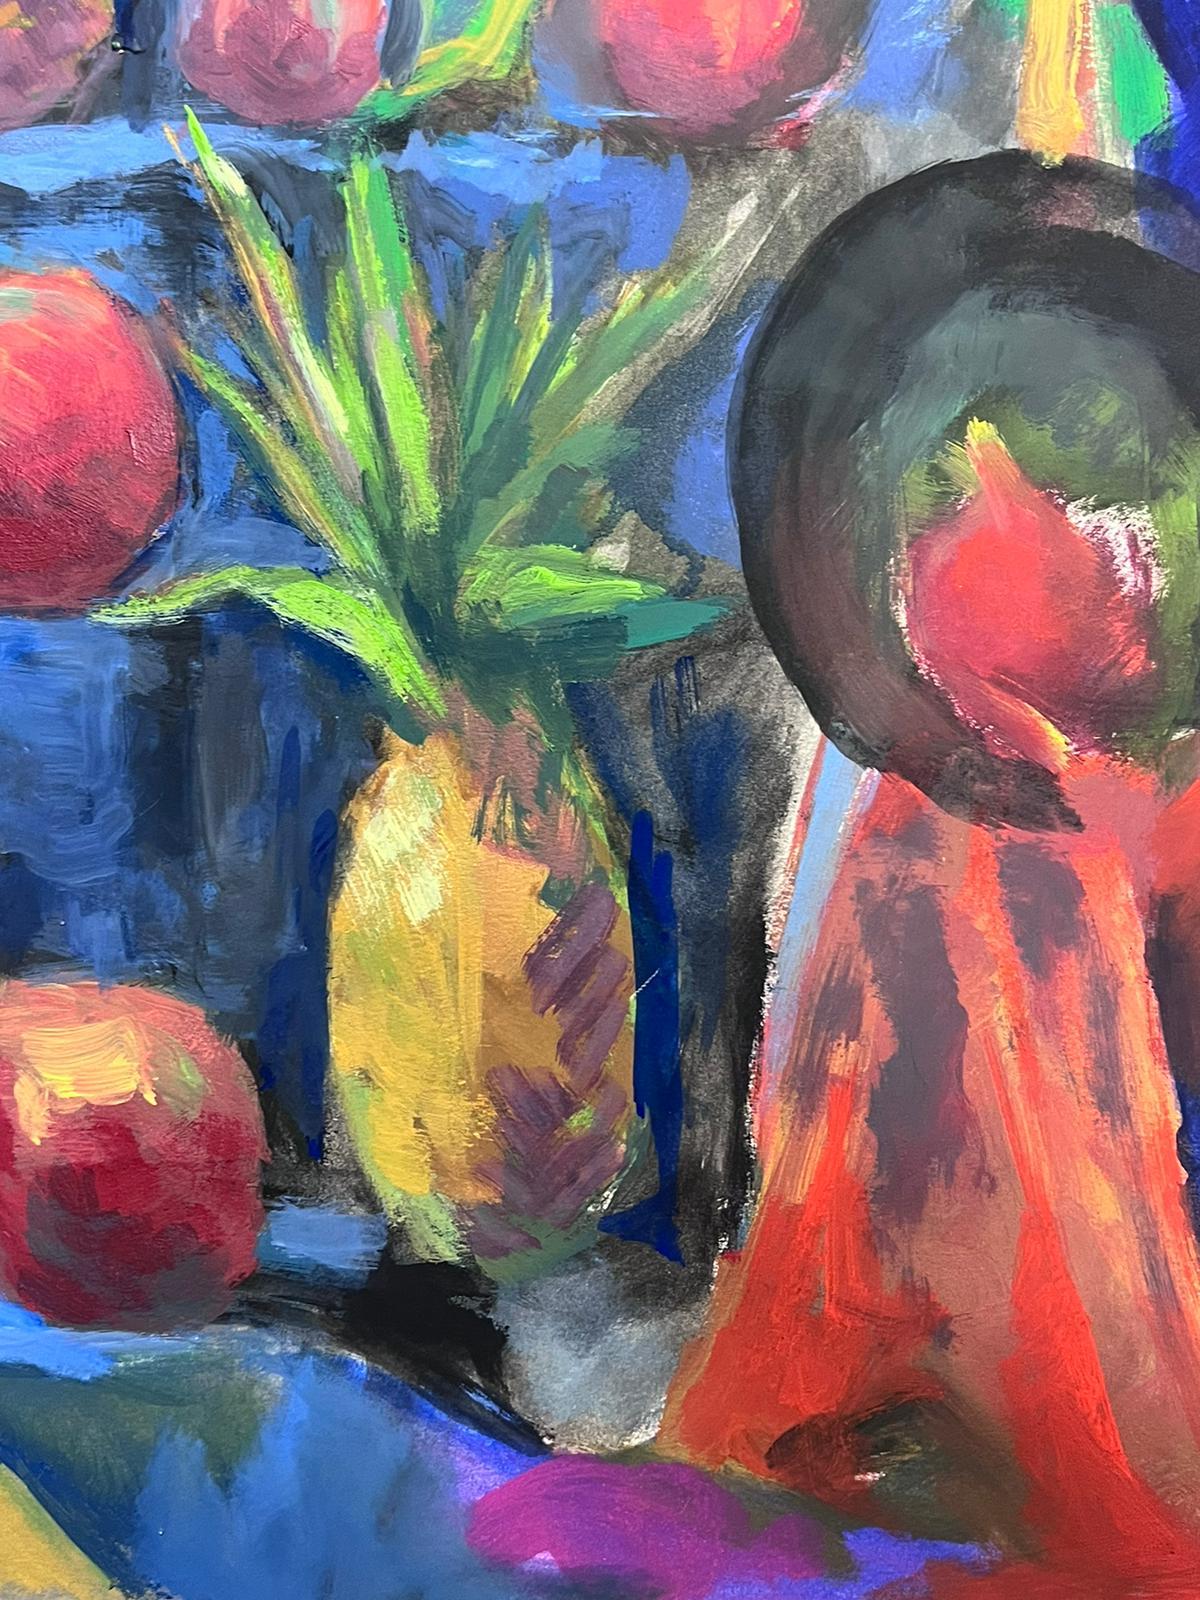 1970's French Modernist Still Life Pineapples Amazing Blue Colors - Painting by Guy Nicod